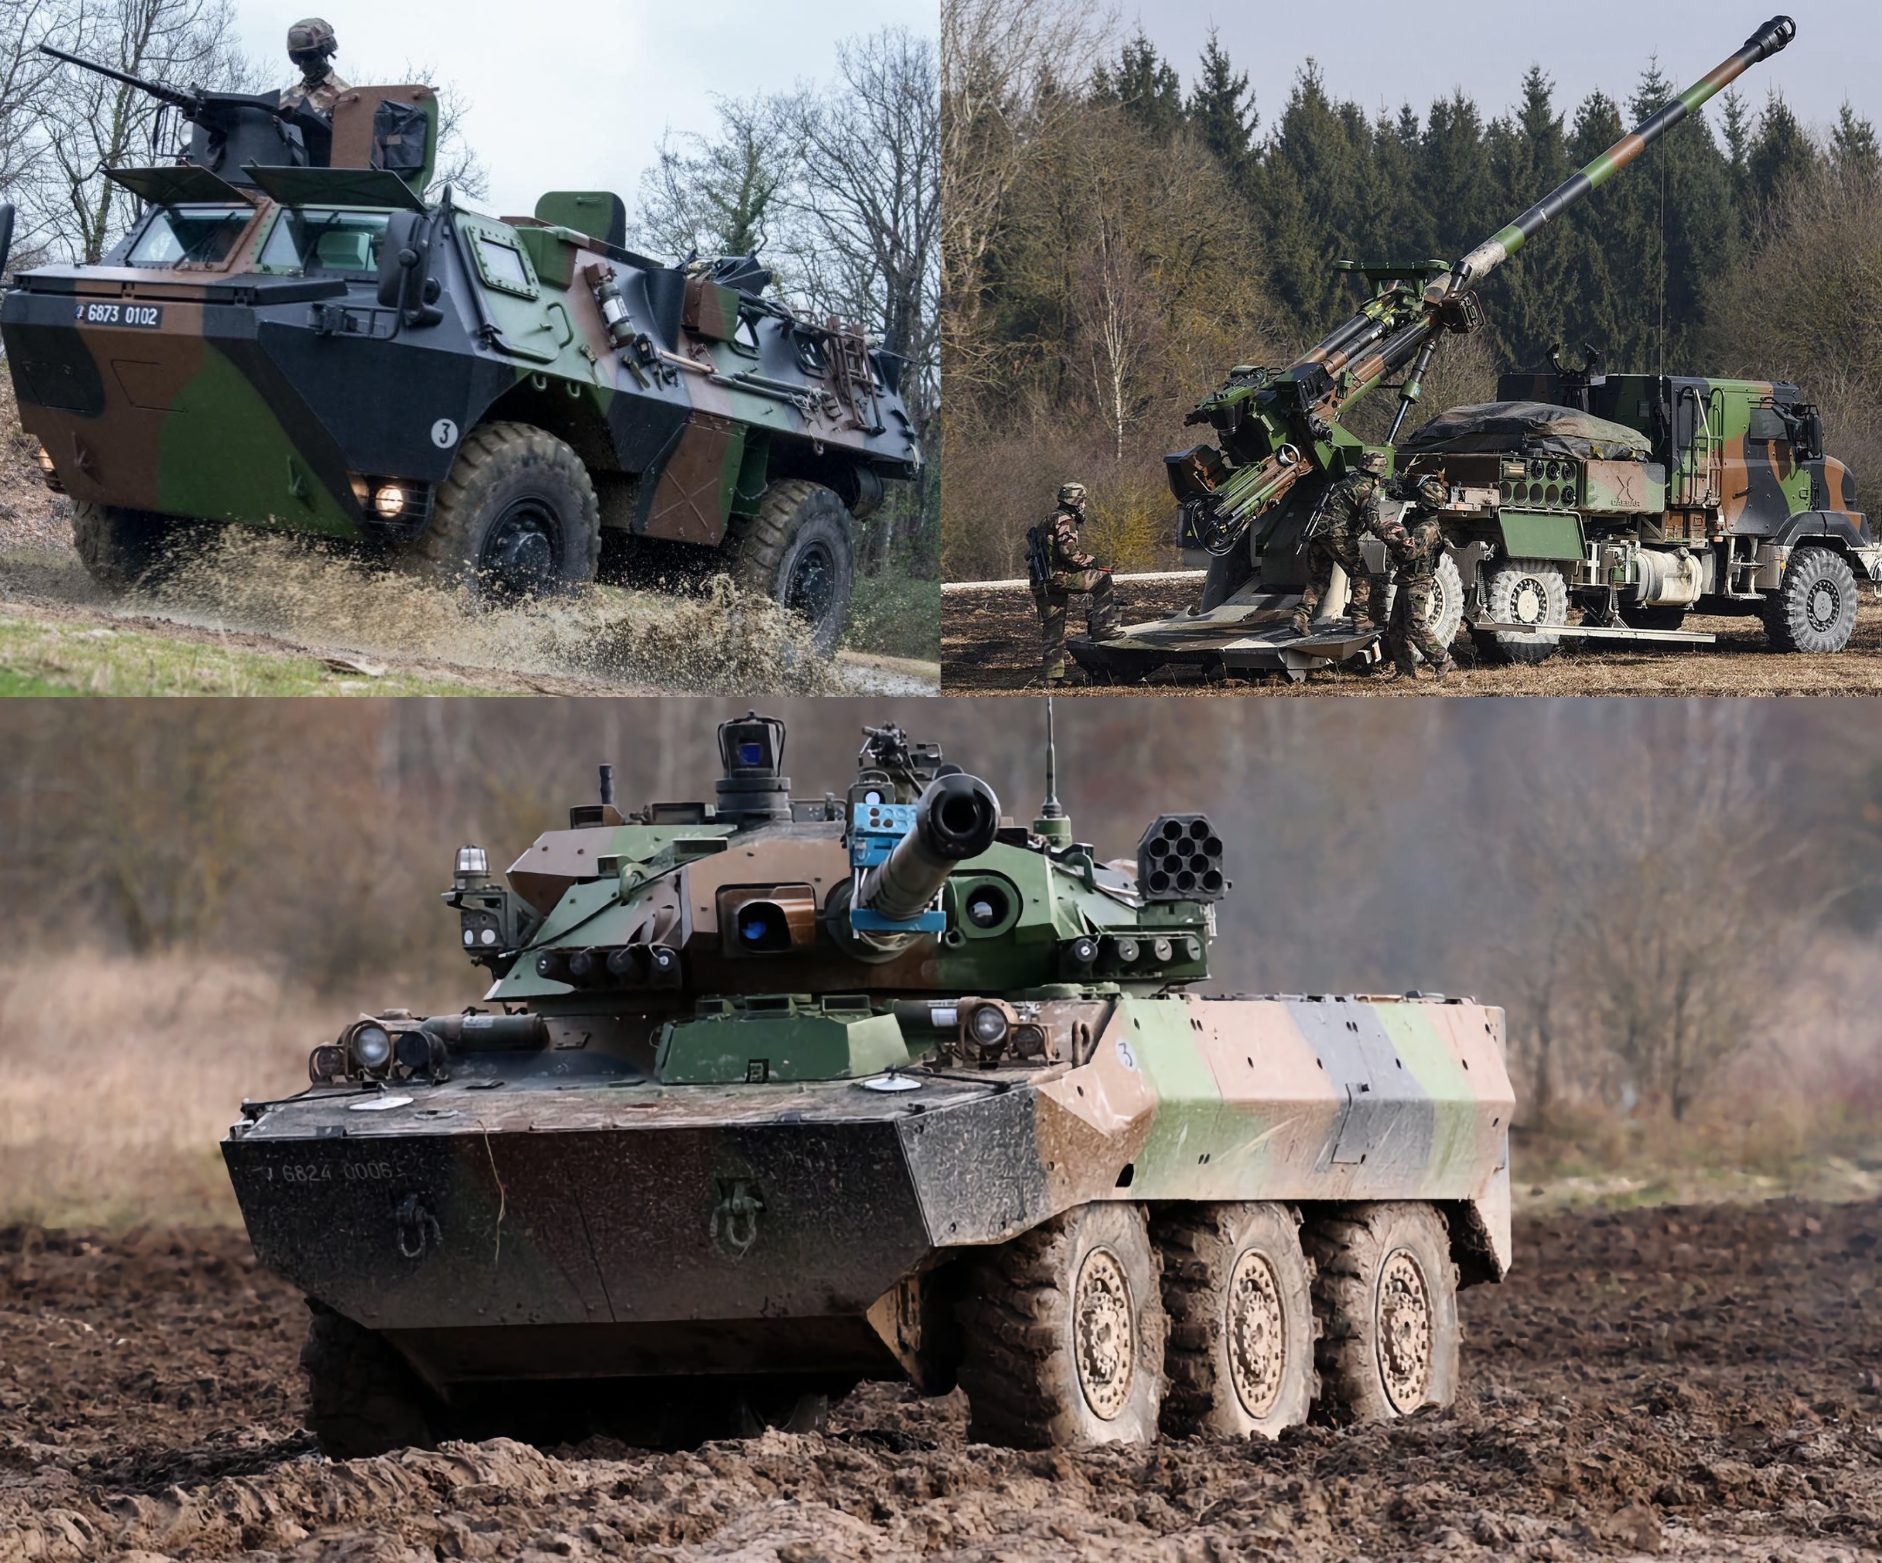 128 VAB branetransporters, 18 Caesar artillery systems and 24 AMX-10RC wheeled tanks: France prepares a new military aid package for Ukraine